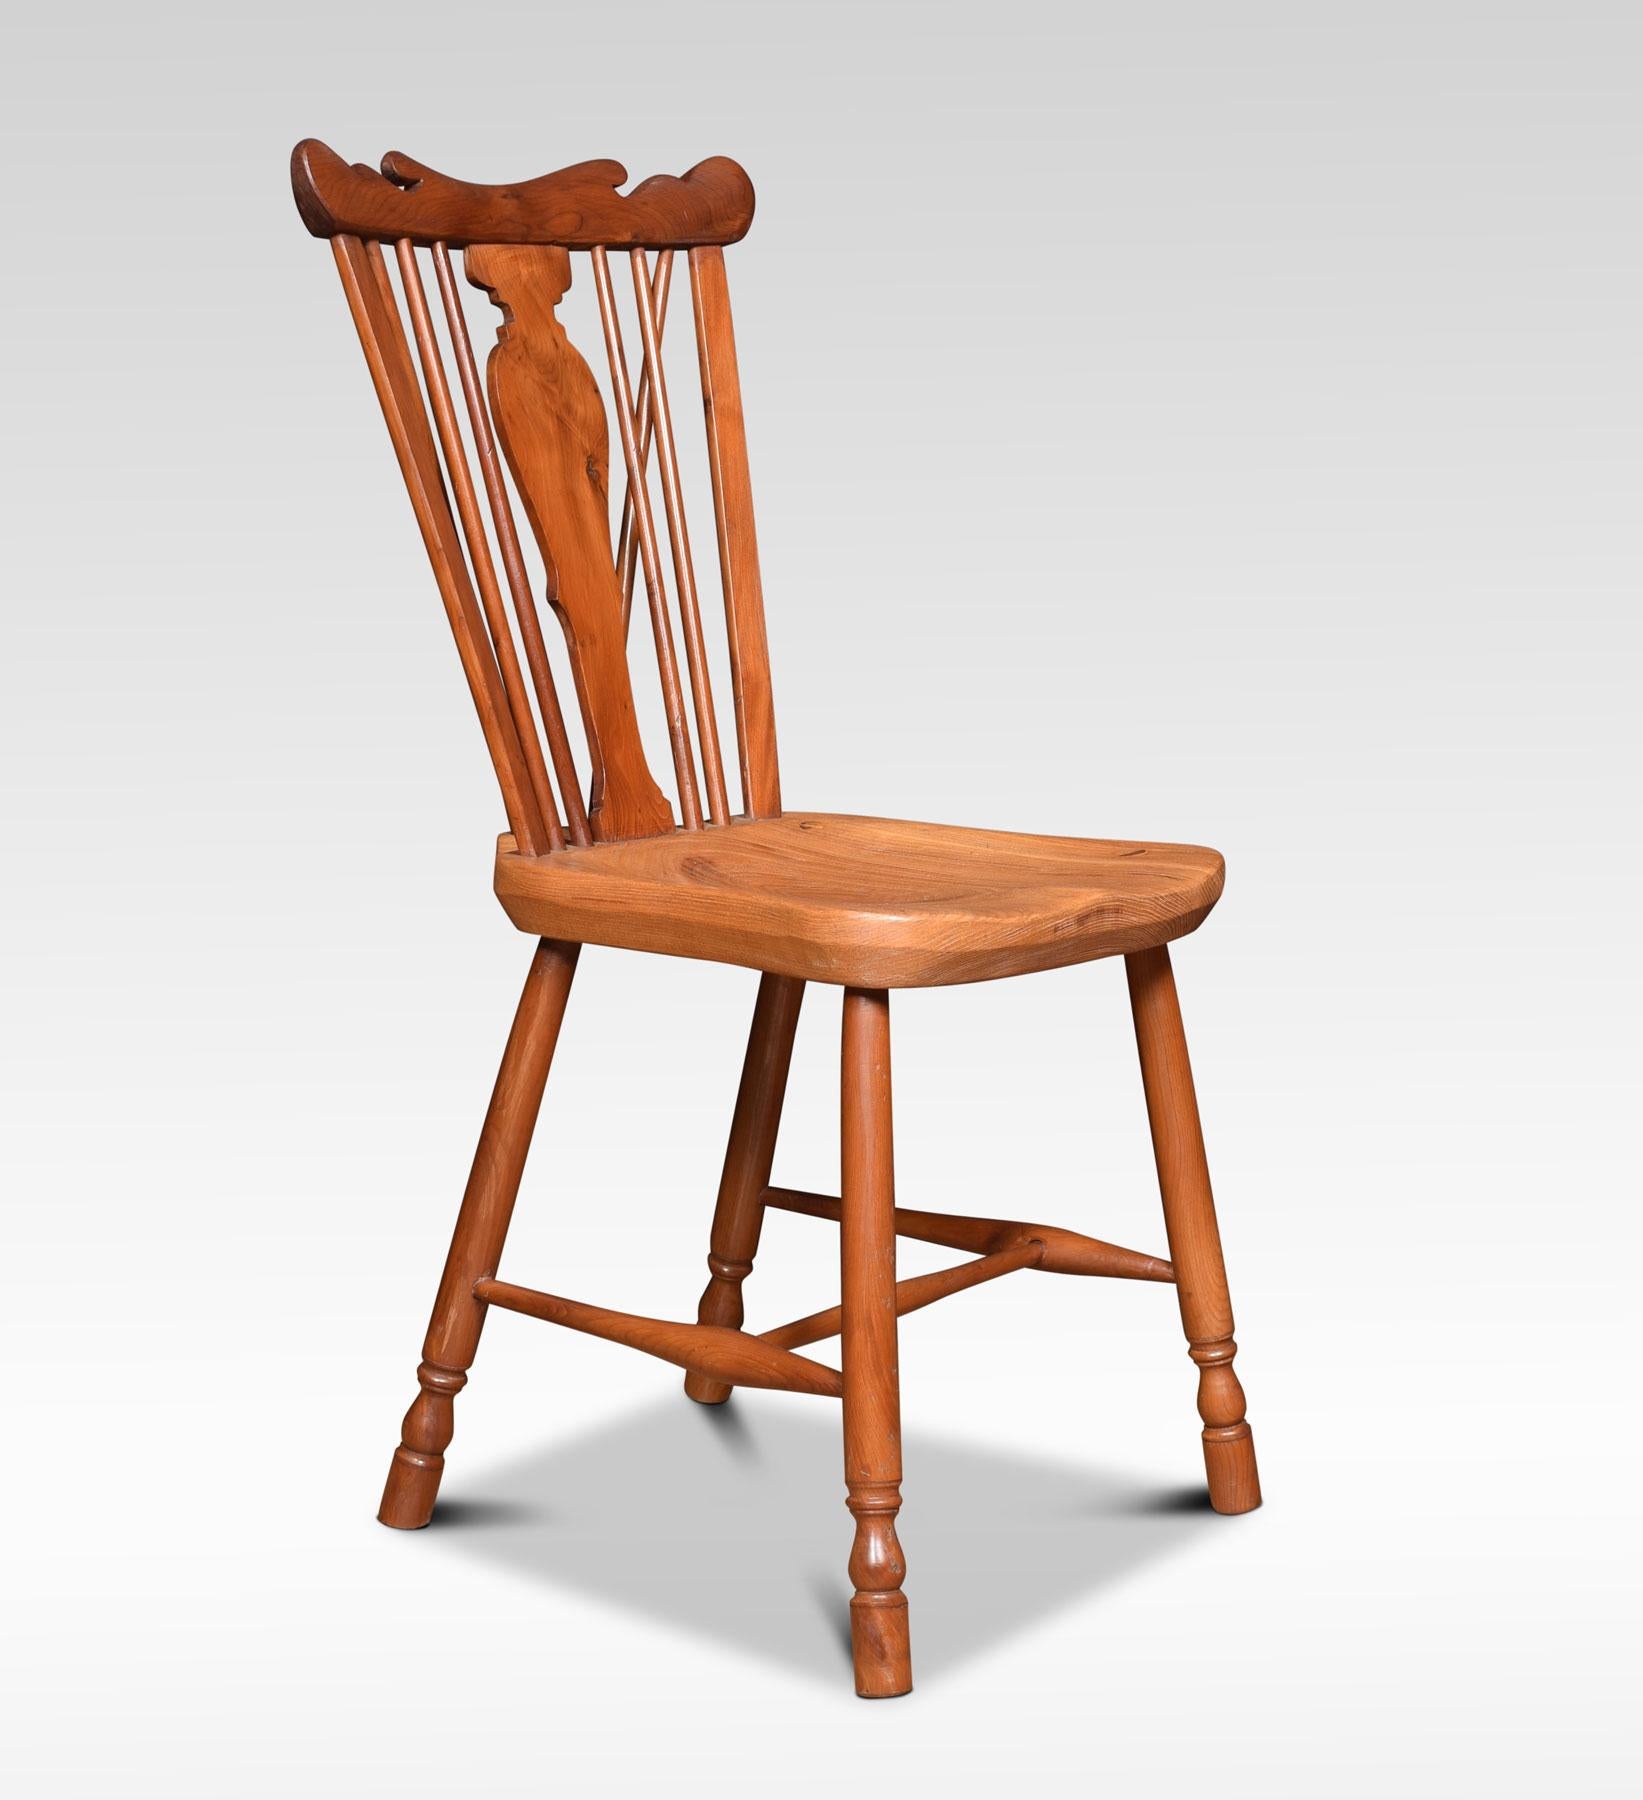 Six yew and elm framed Windsor chairs, the backs with carved crests, spindles and vase-shaped splats above solid wedge-back seats. All raised on turned legs united by H stretcher.
Dimensions:
Height 44 inches height to seat 21 inches
Length 23.5